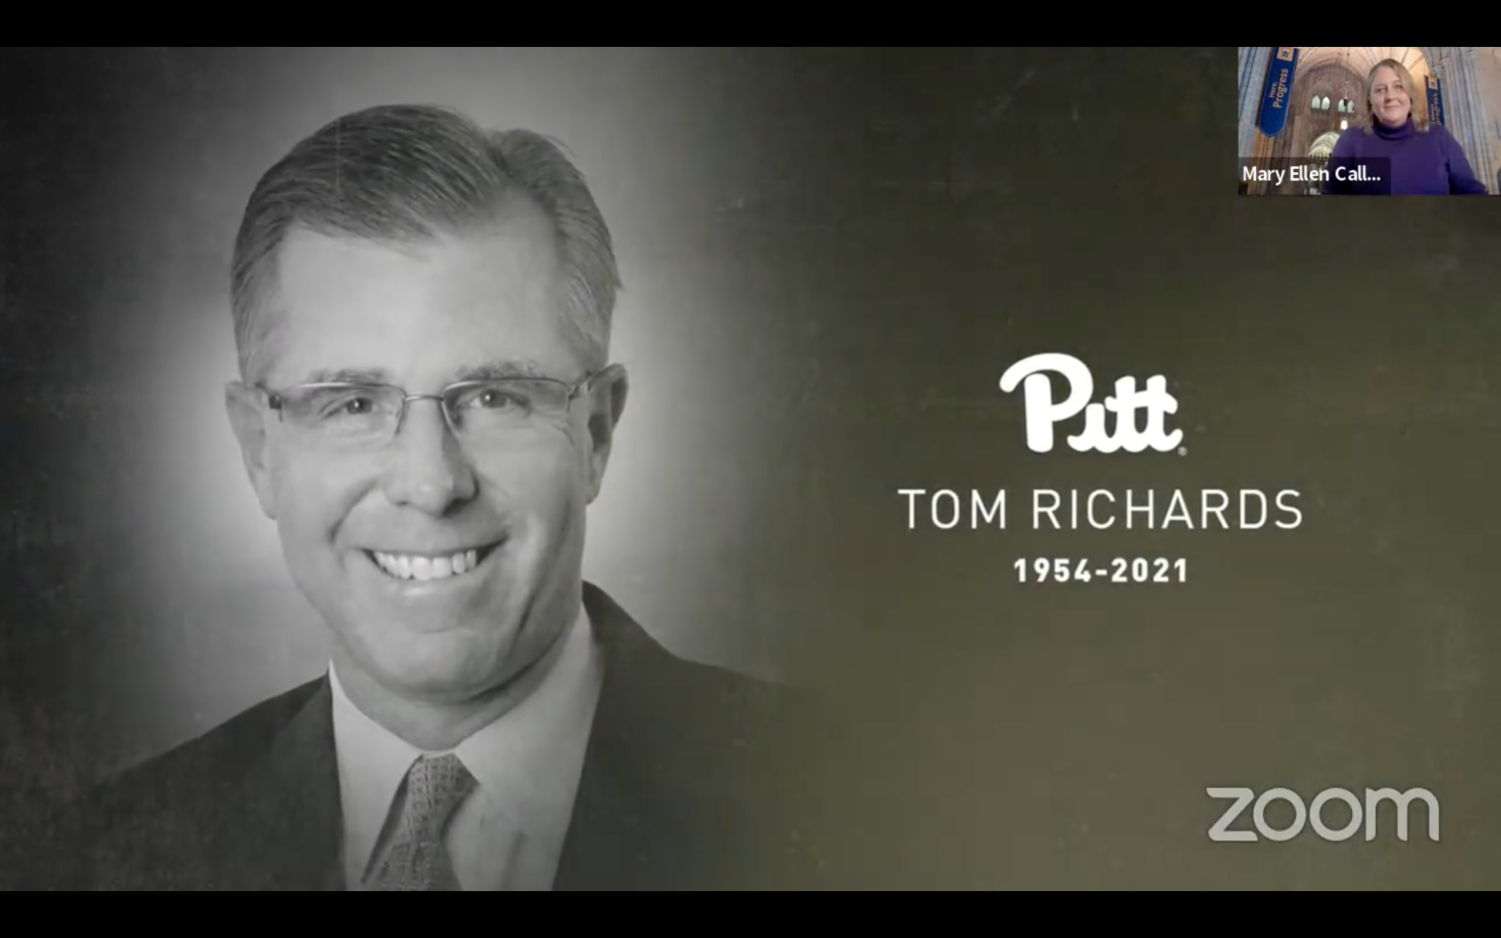 A photo made from a tribute video to the late Tom Richards, former chair of Pitt's Board of Trustees.